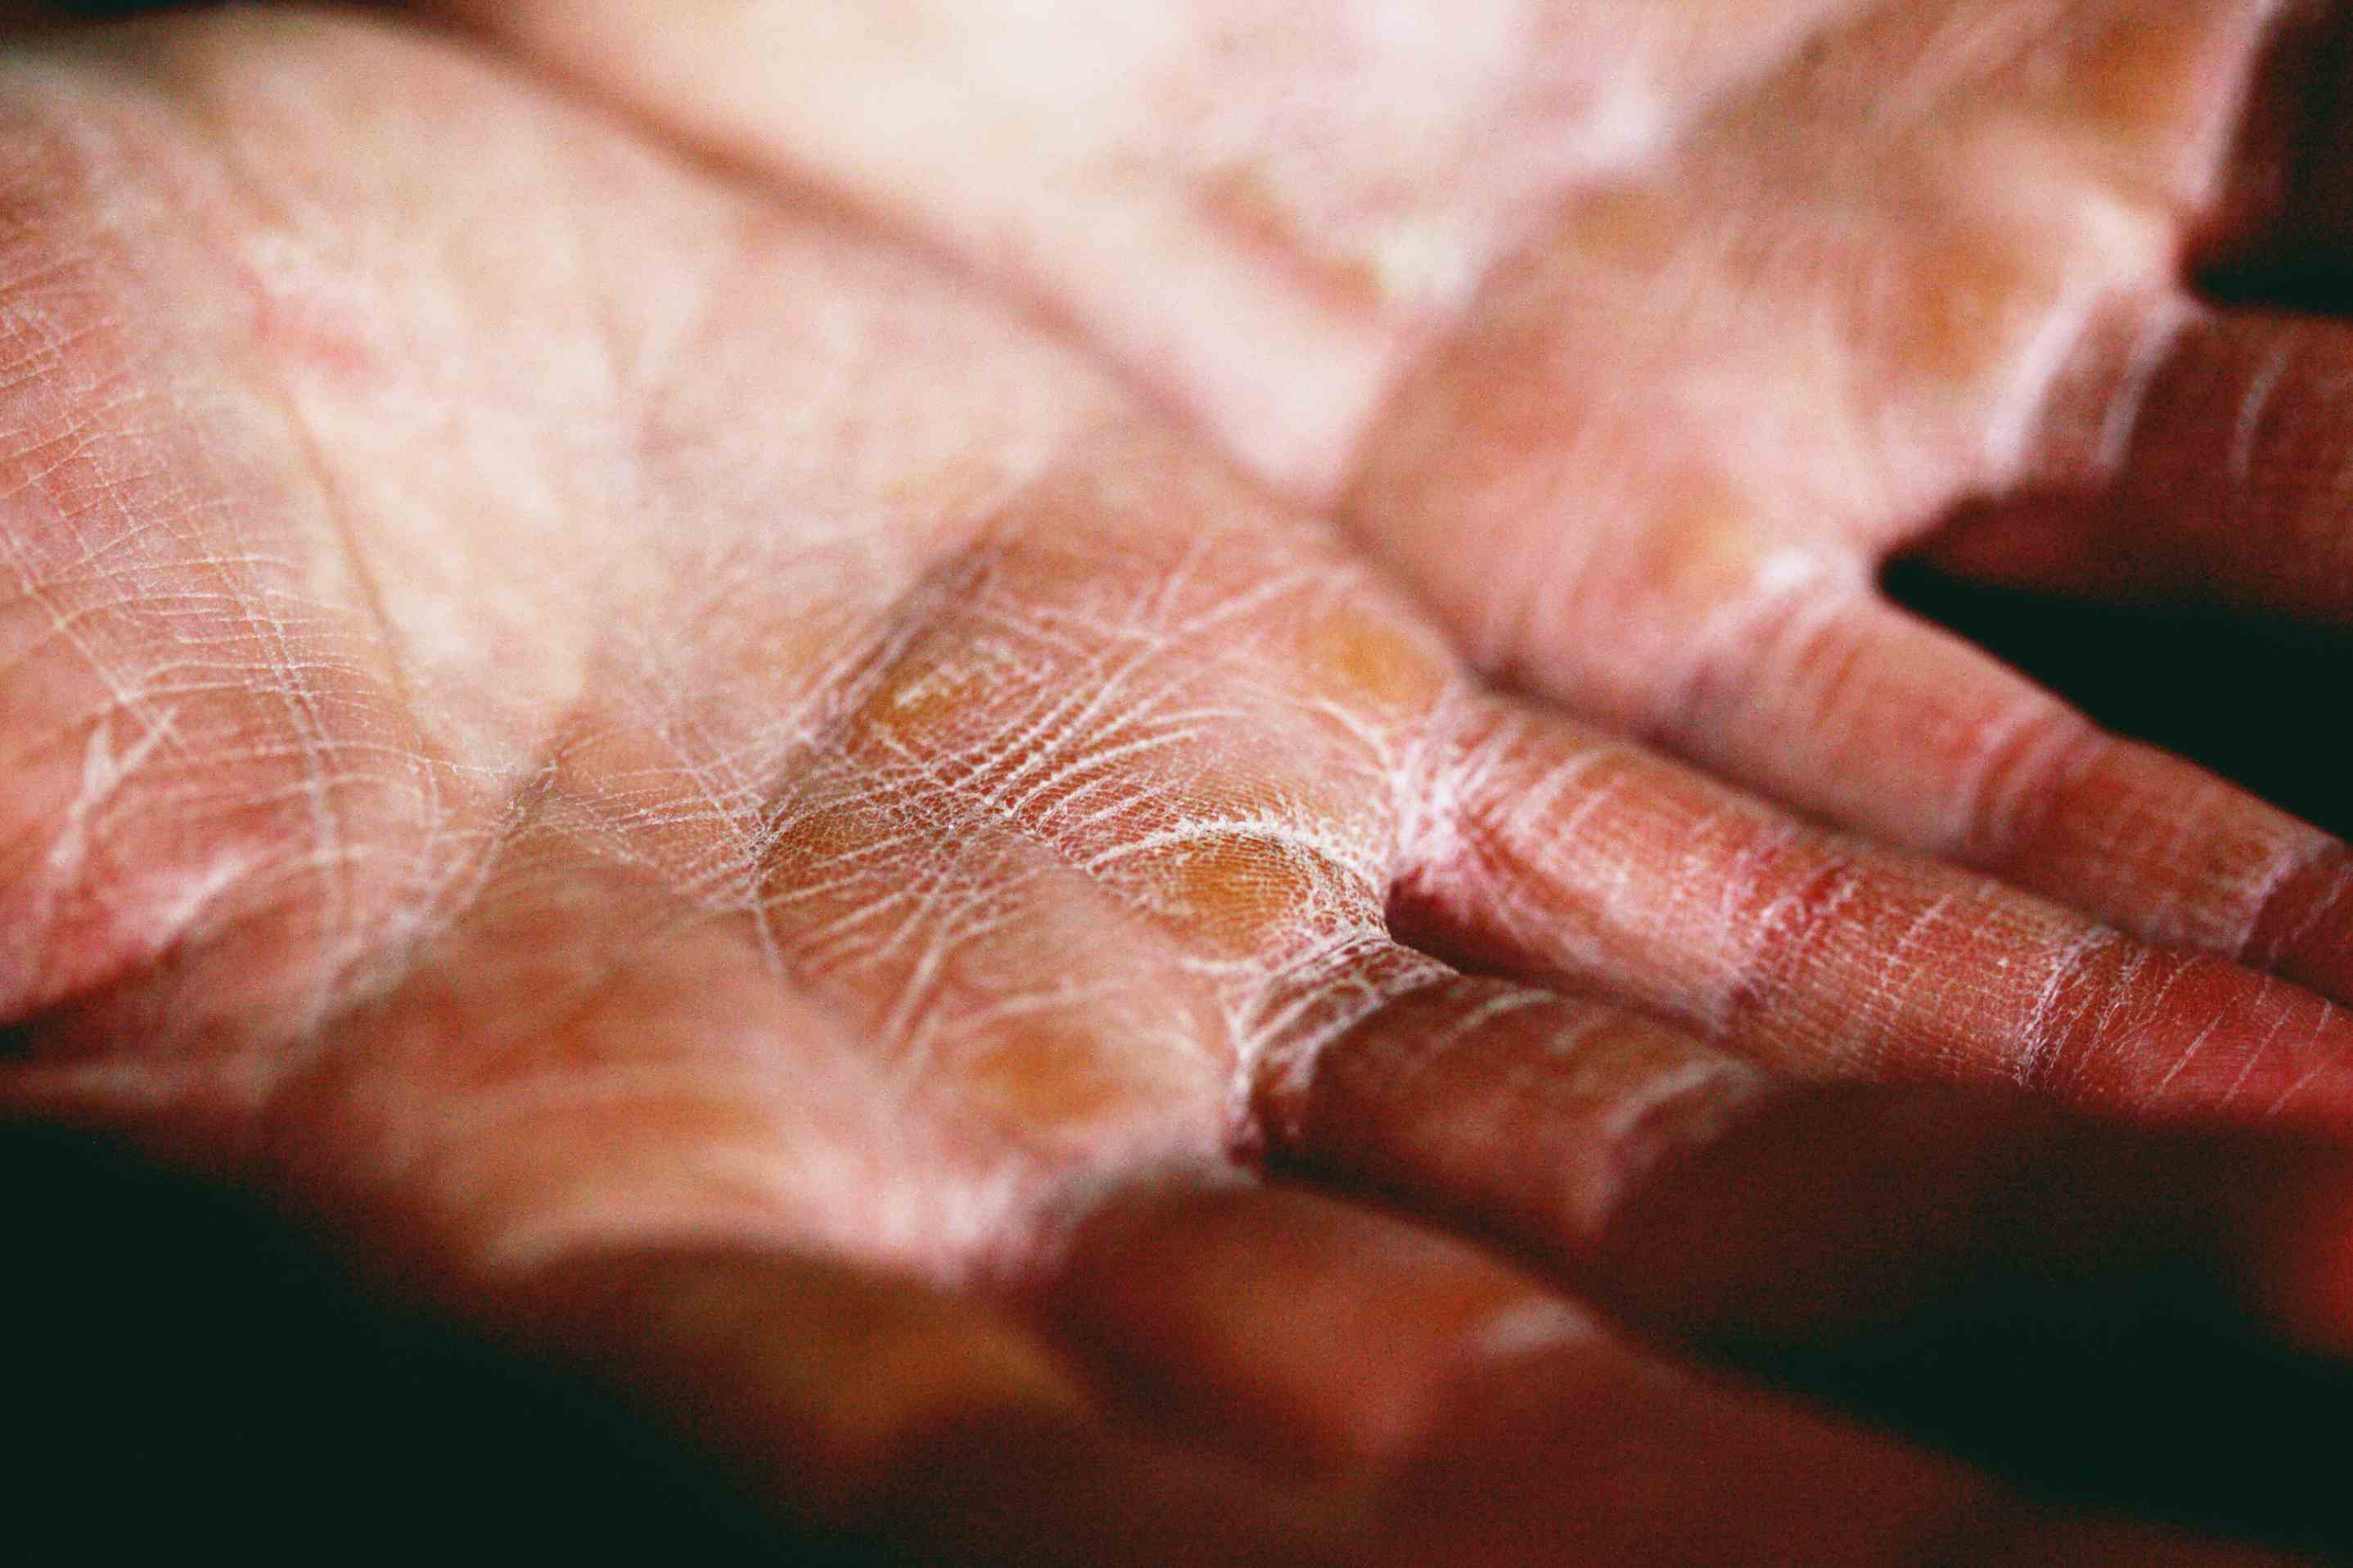 An elder's hand with full of wrinkles and fine lines